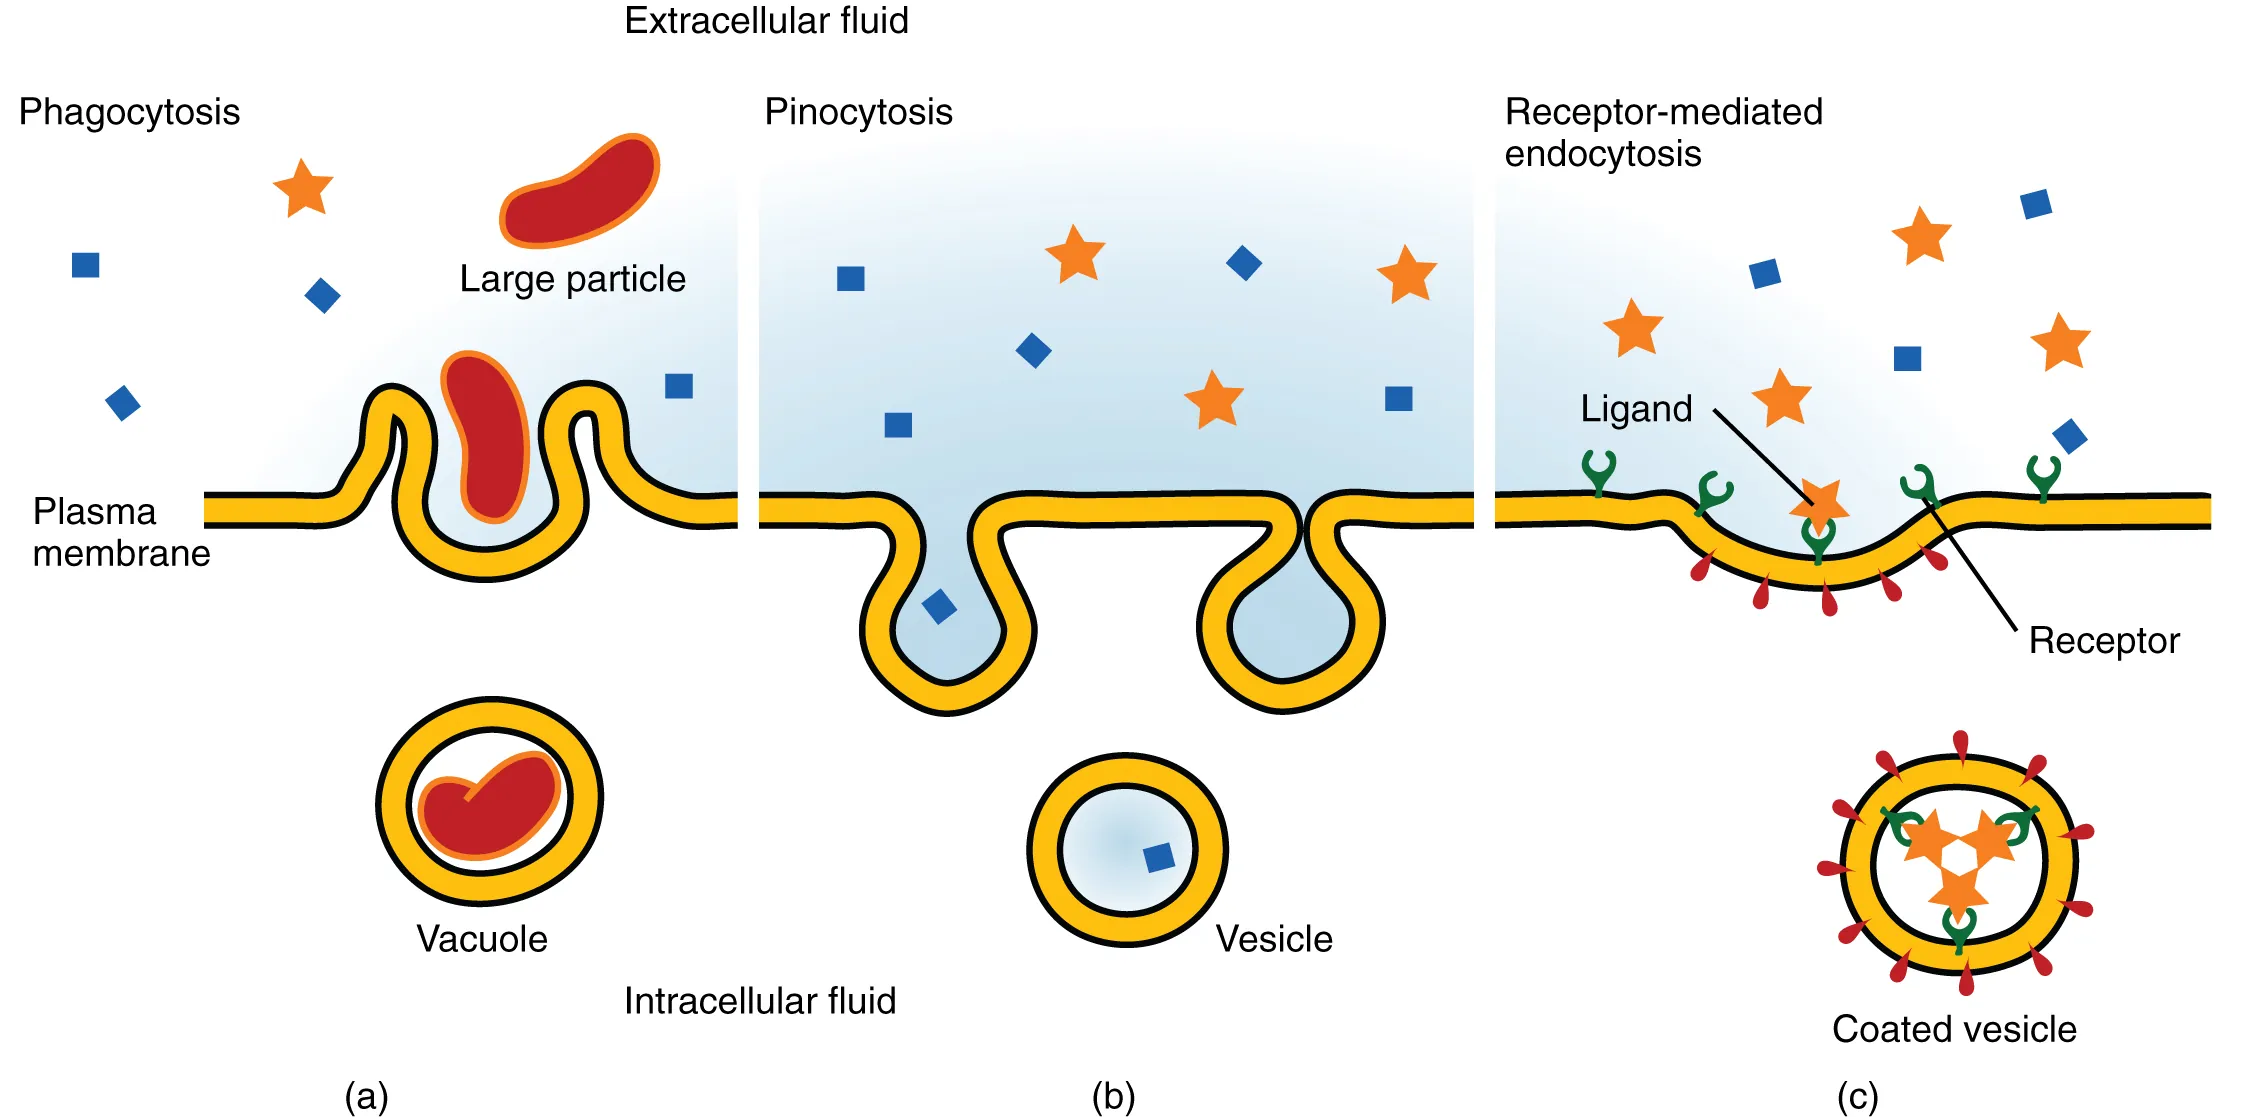 This image shows the three different types of endocytosis. The left panel shows phagocytosis, where a large particle is seen to be engulfed by the membrane into a vacuole. In the middle panel, pinocytosis is shown, where a small particle is engulfed into a vesicle. In the right panel, receptor-mediated endocytosis is shown; the ligand binds to the receptor and is then engulfed into a coated vesicle.